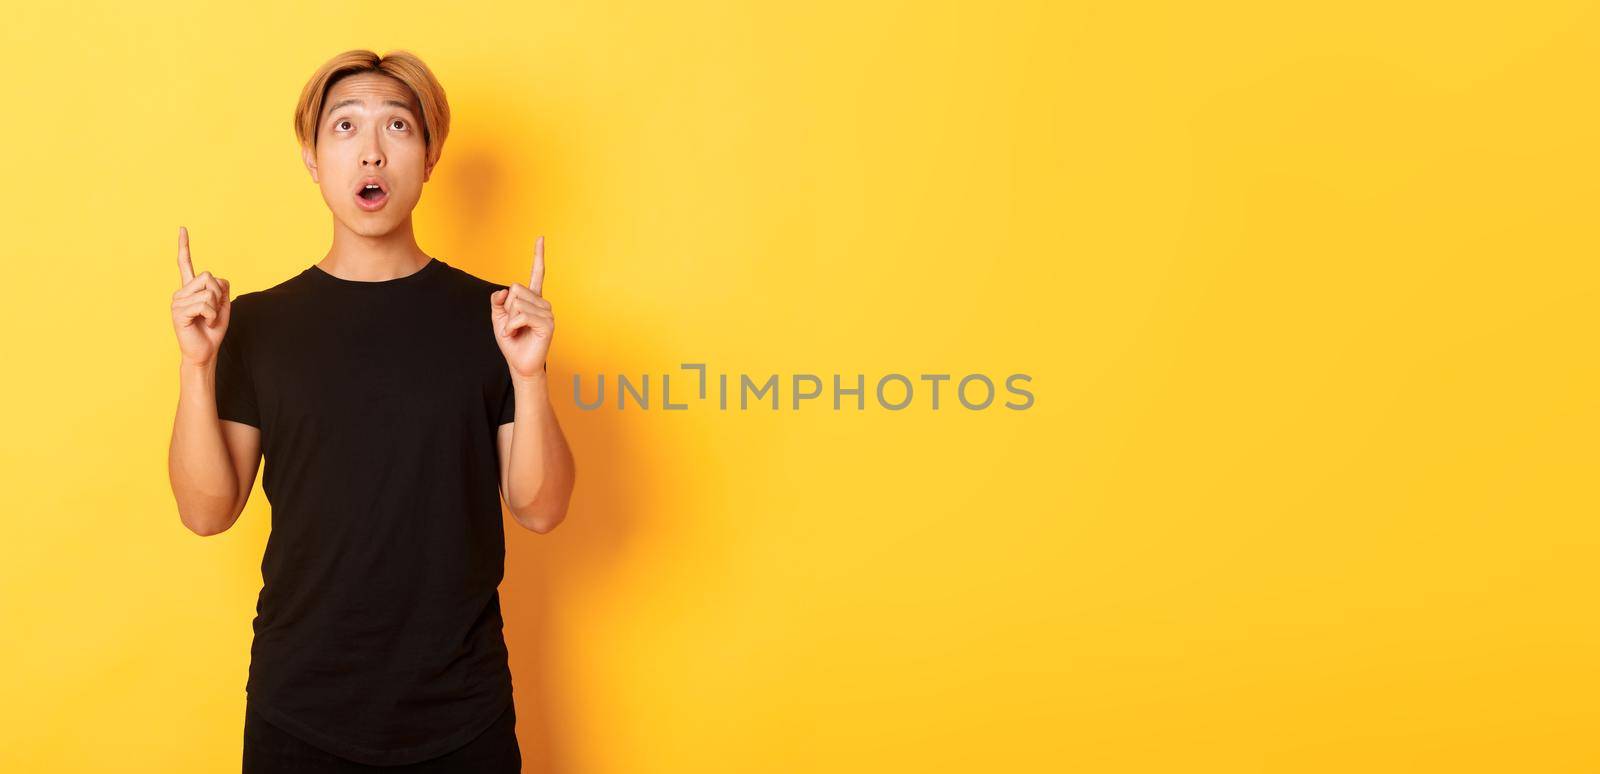 Portrait of curious and amazed asian guy with blond hair, wearing black t-shirt, looking and pointing fingers up astonished, yellow background.